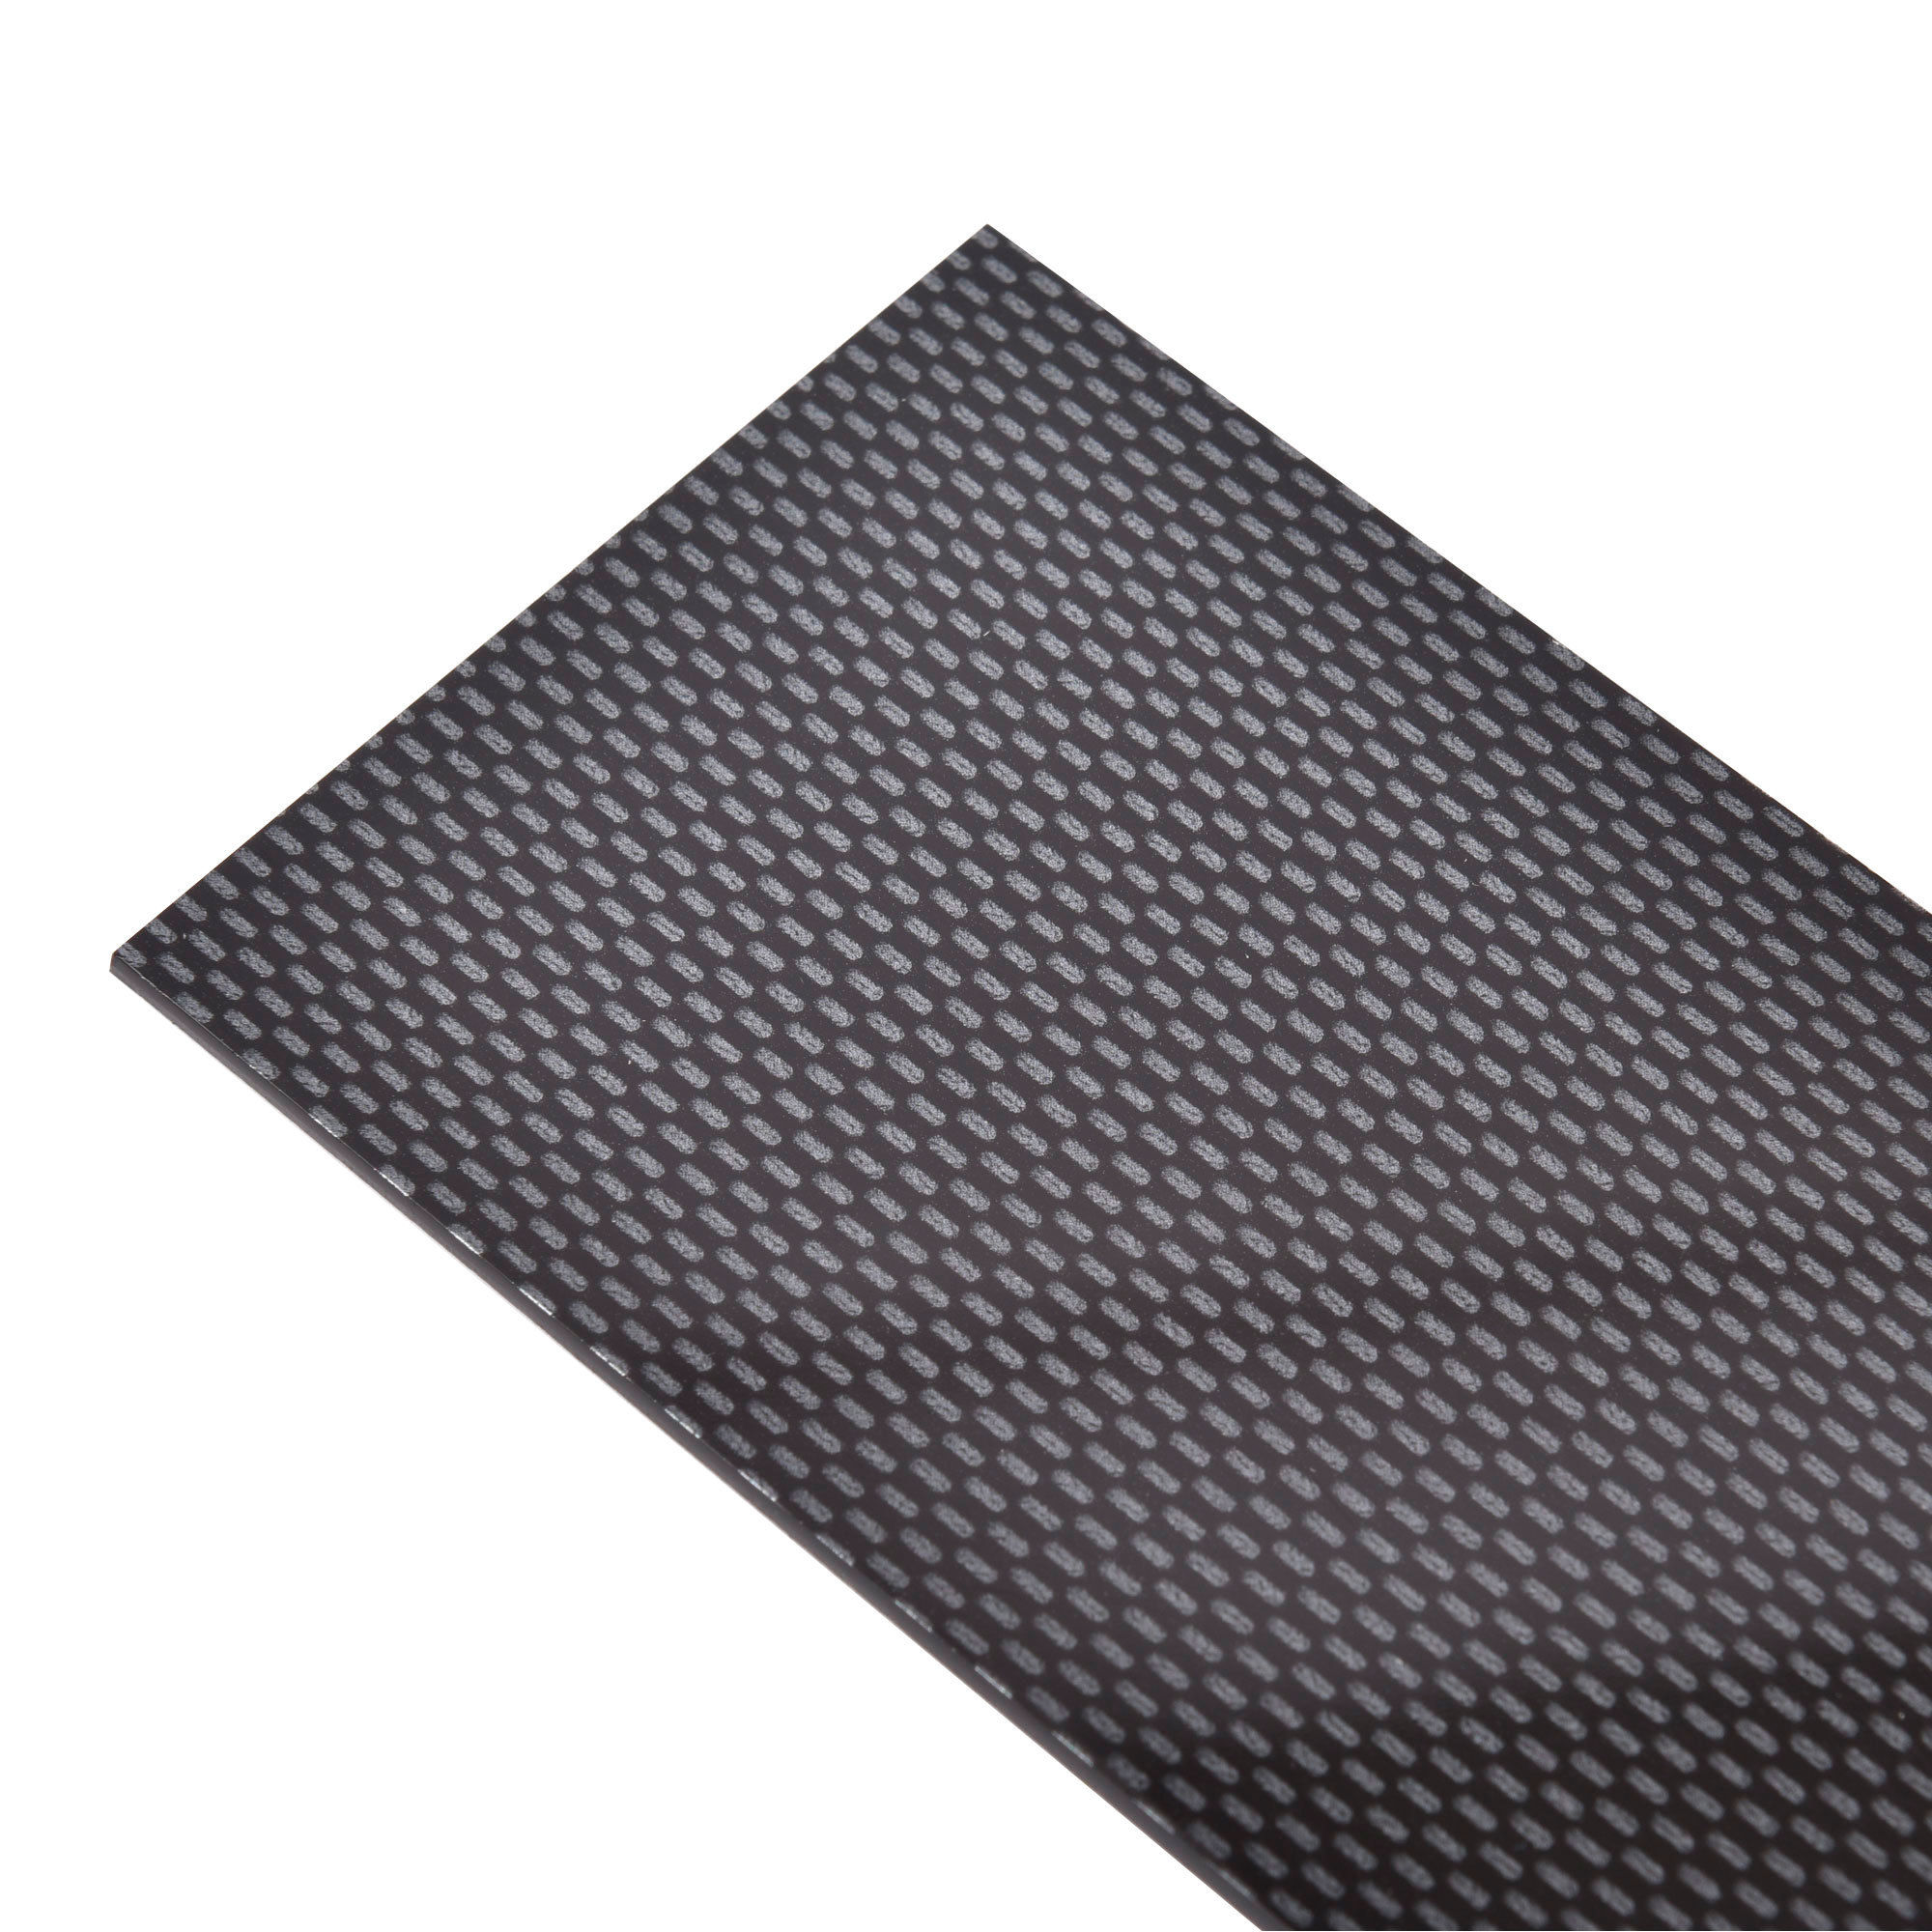 3mm Carbon Fibre Effect ABS Sheet 10 SIZES TO CHOOSE Acrylonitrile Butadiene Sty 